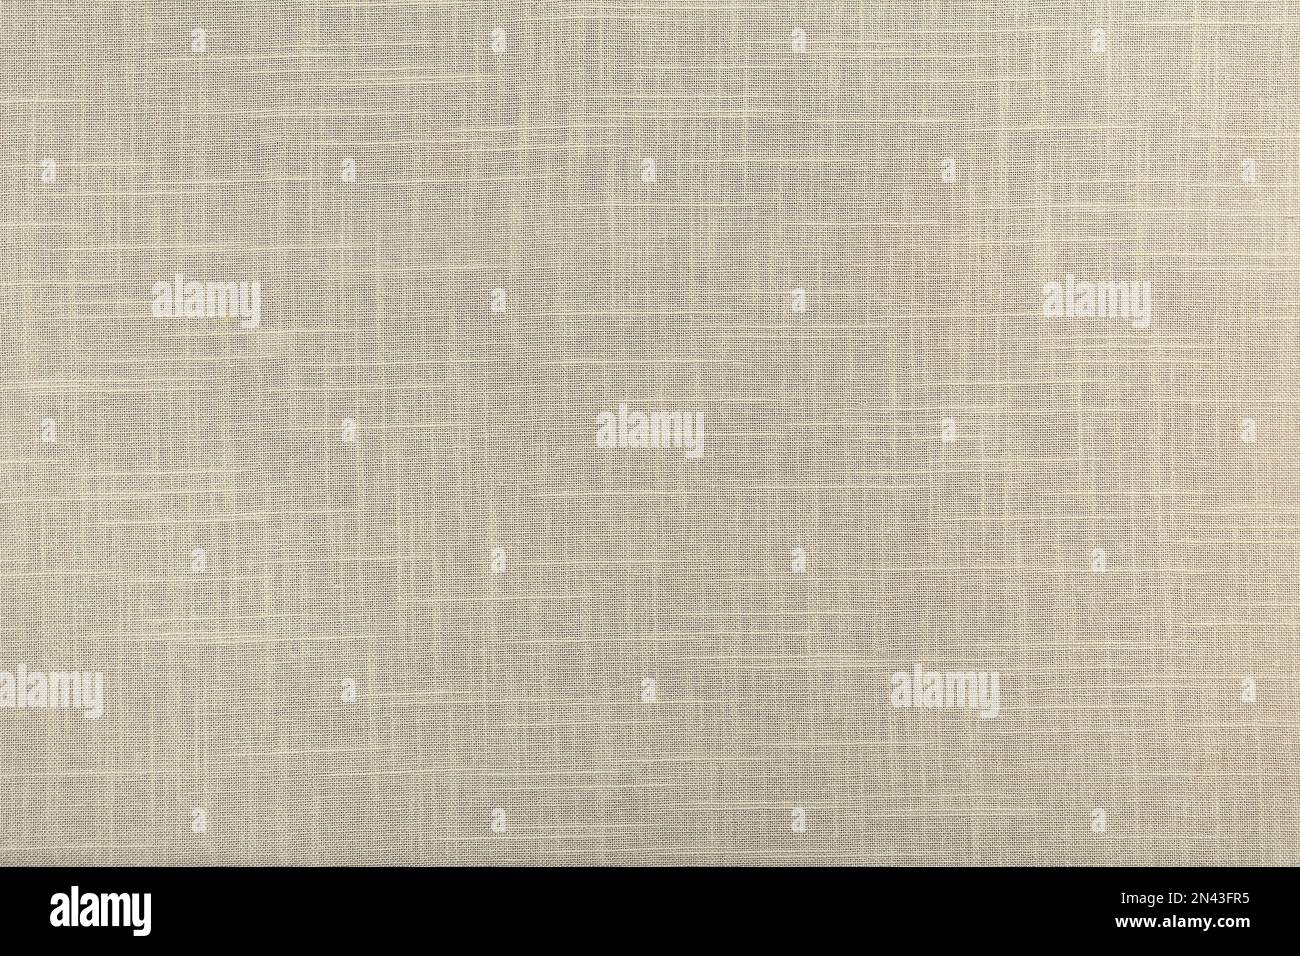 finely textured background of beige linen fabric. Stock Photo